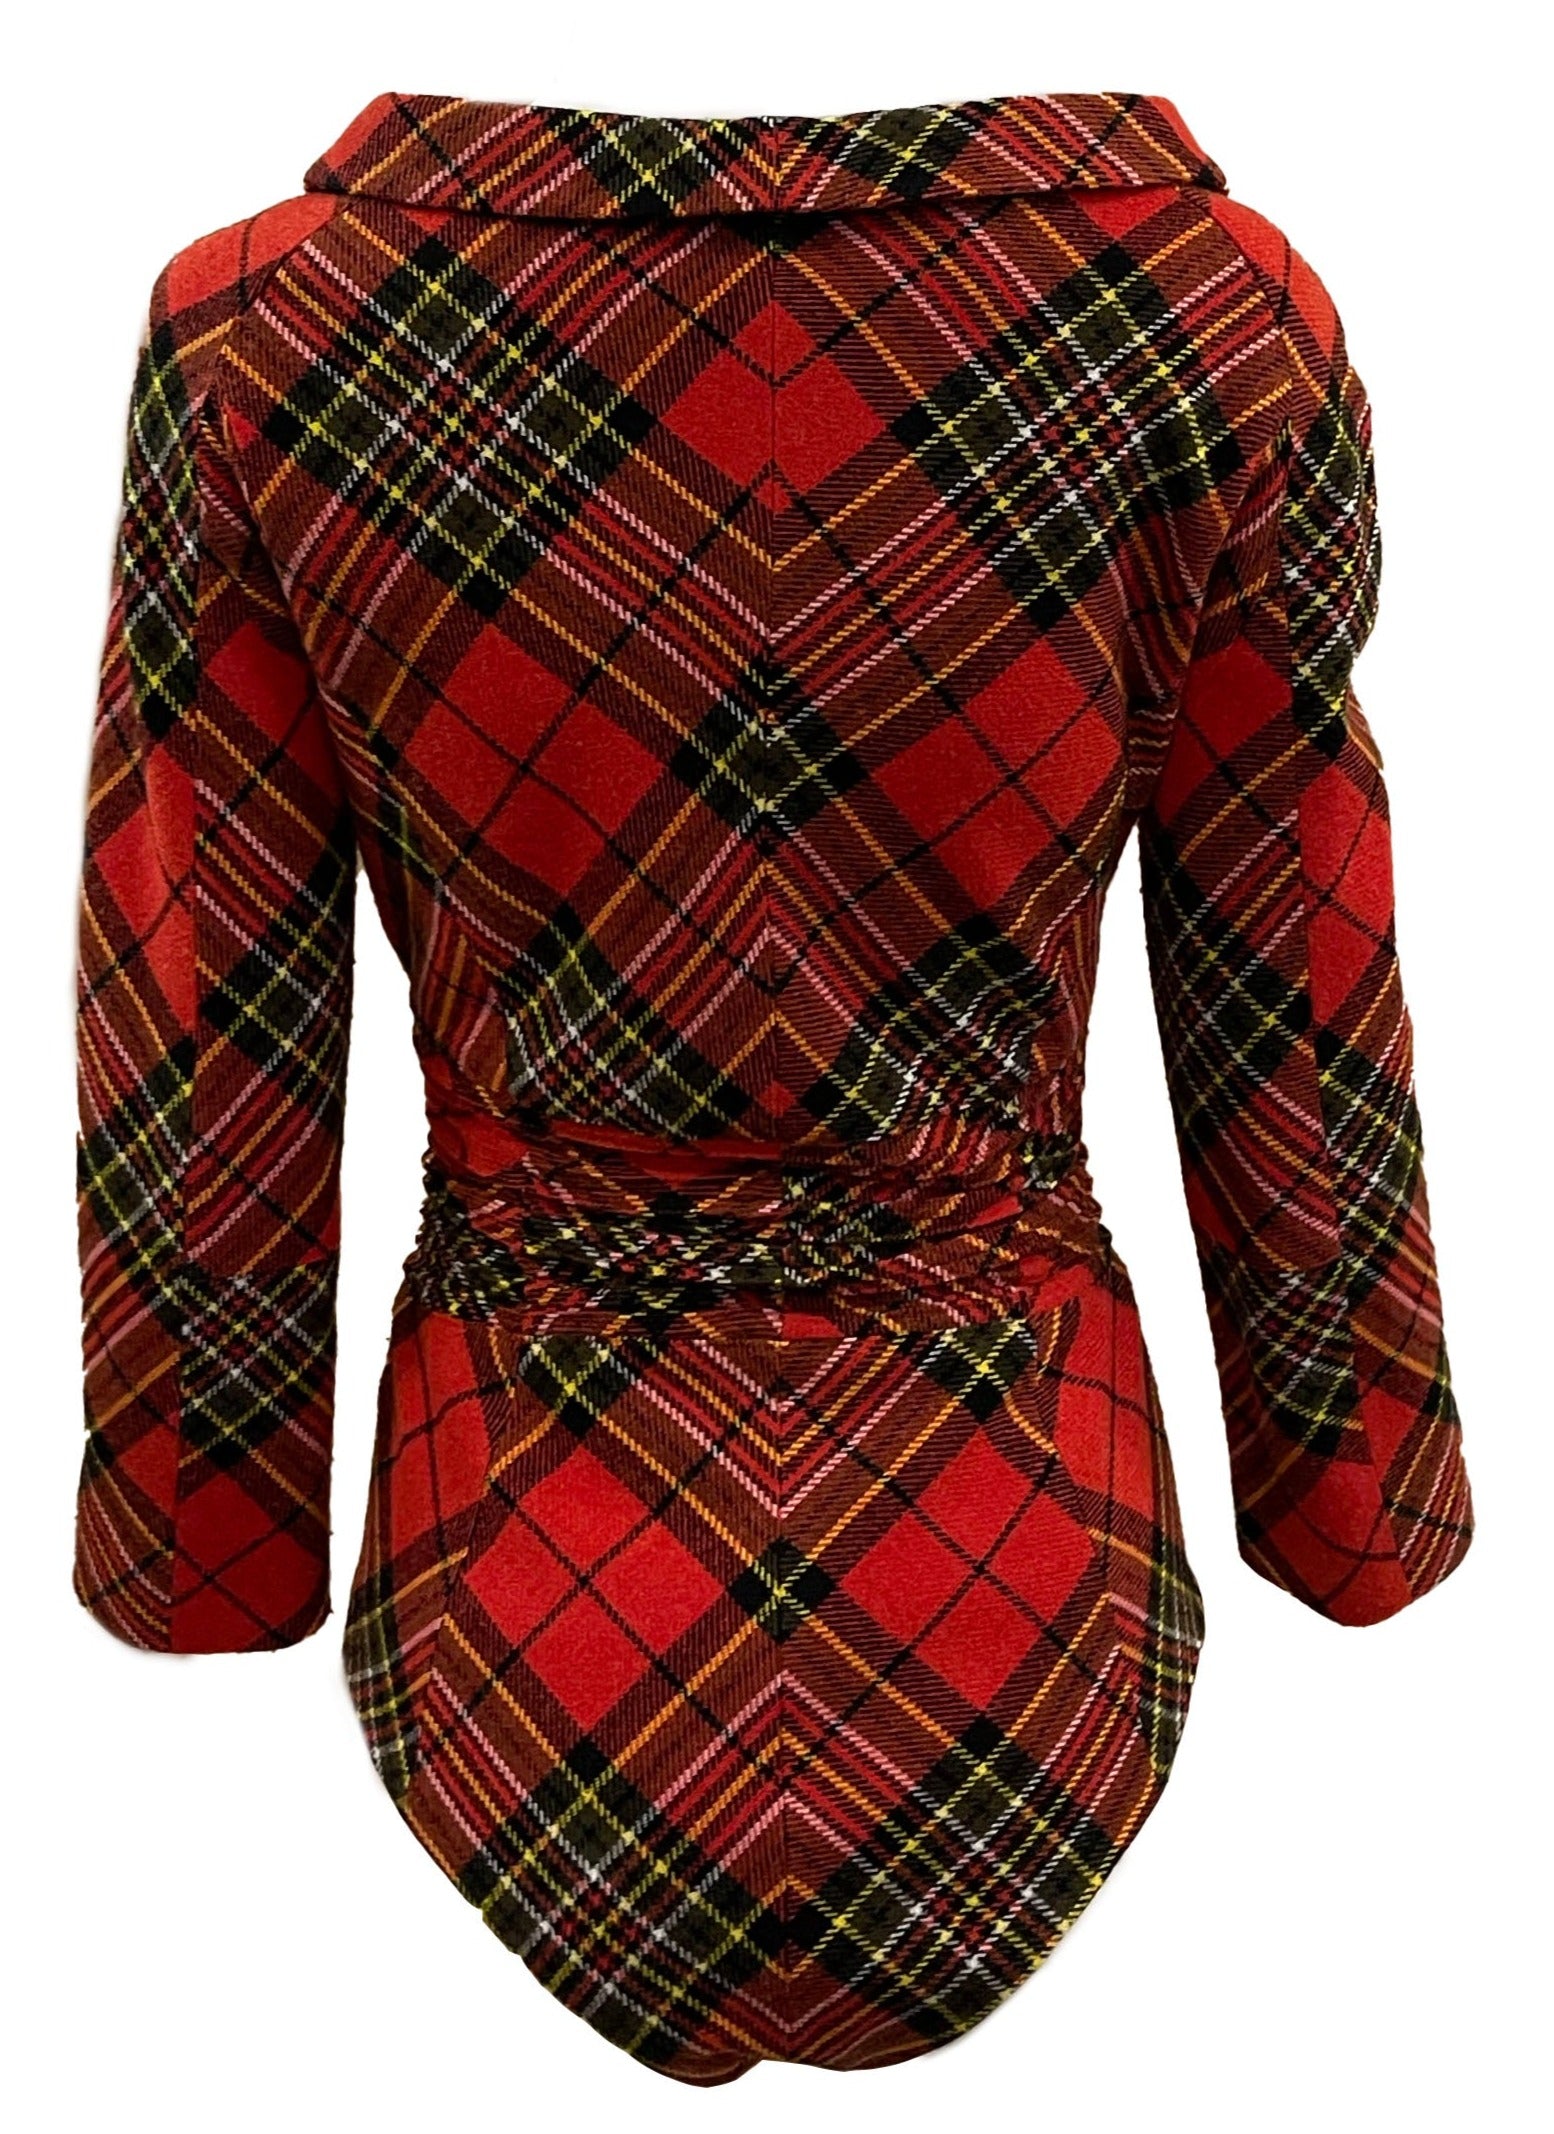 Junya Watanabe for Comme Des Garcons Red Plaid Wool Bodysuit BACK 2 of 5